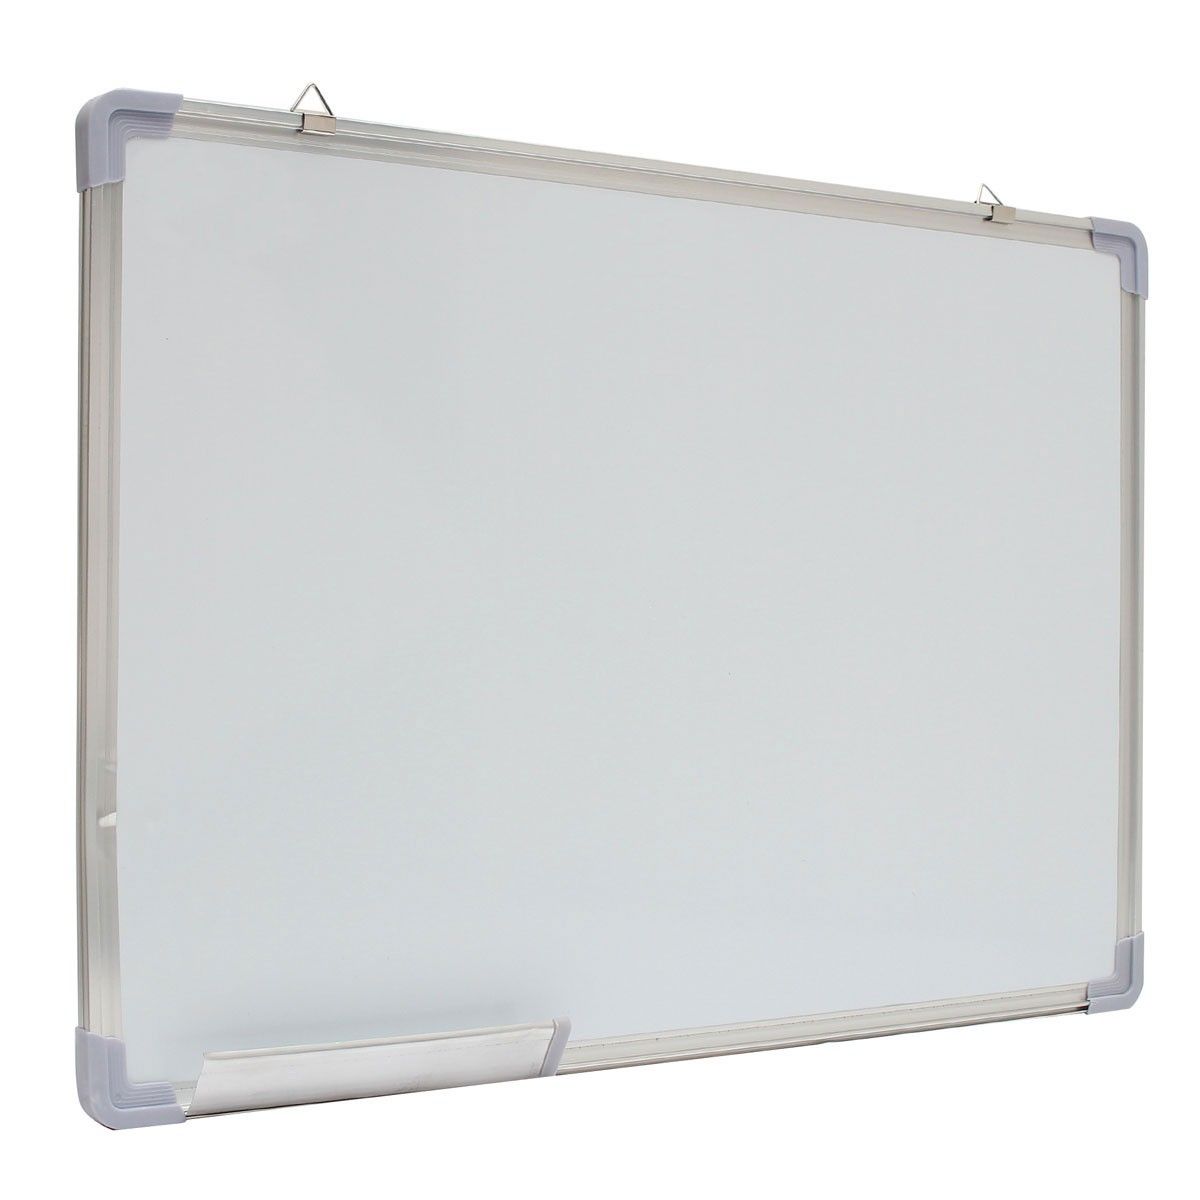 28x20-Inch-Magnetic-Dry-Erase-Whiteboard-Writing-Notice-Board-Single-Side-Office-School-Message-1333717